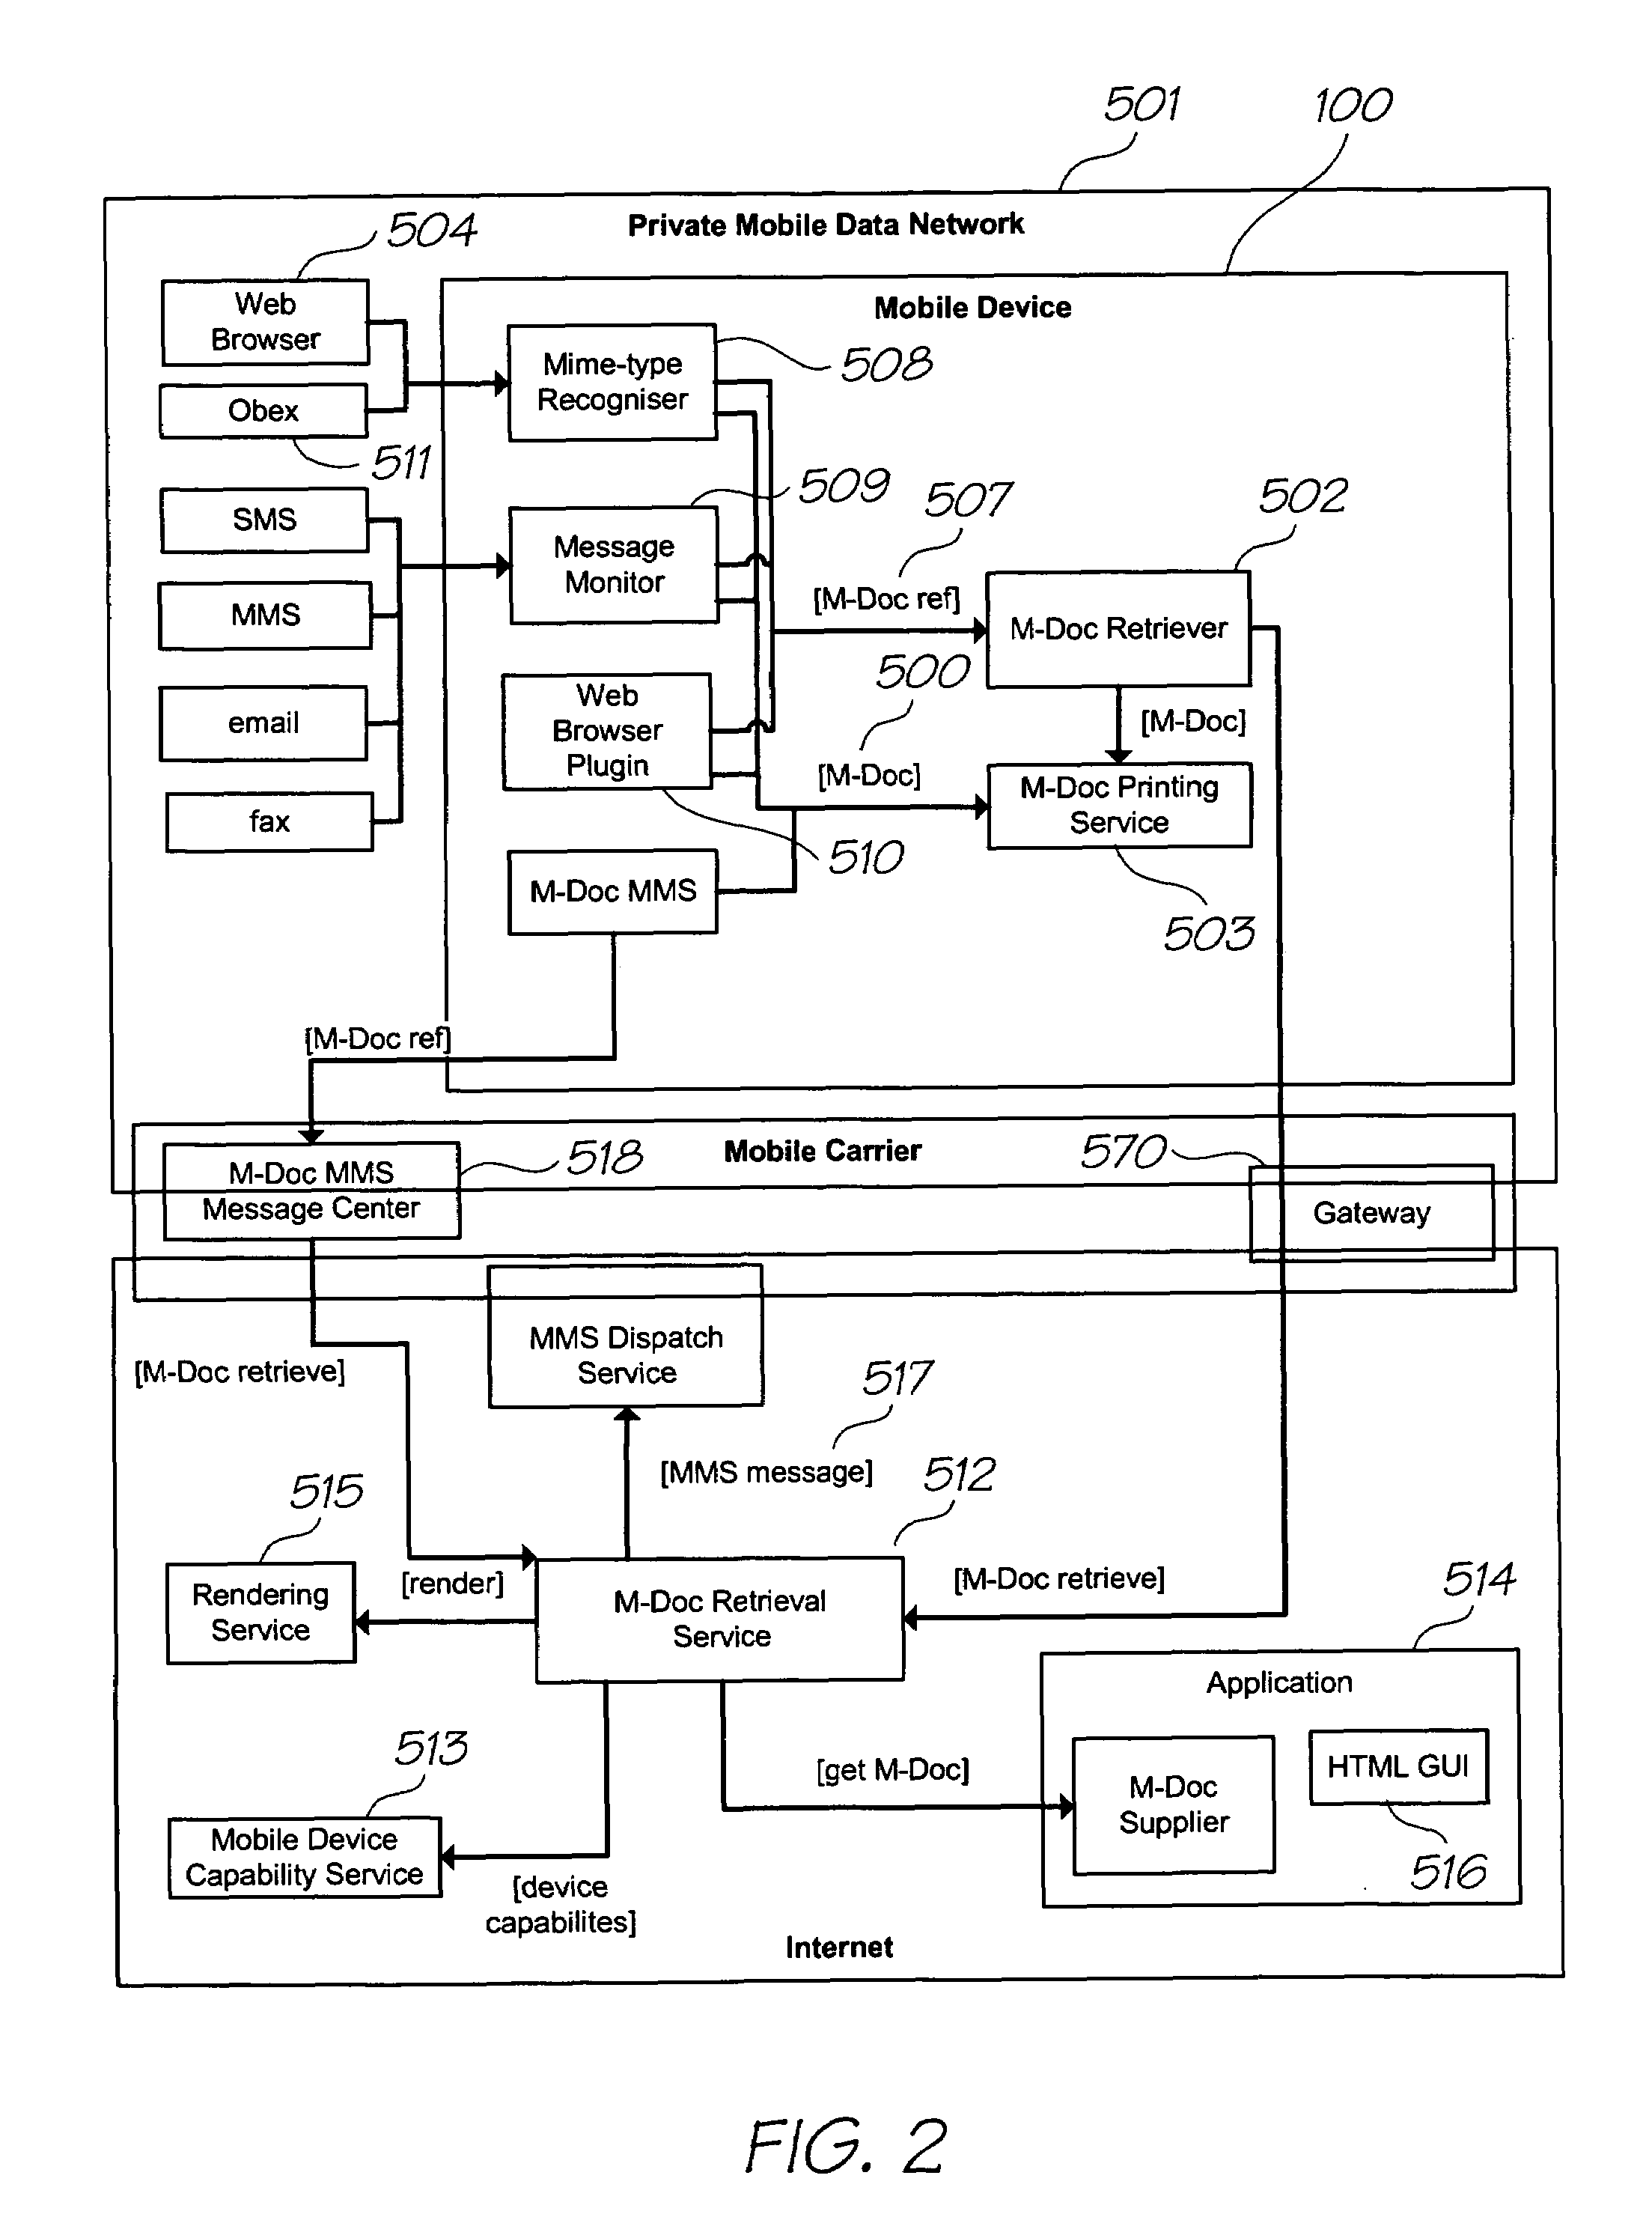 Printing video information using a mobile device